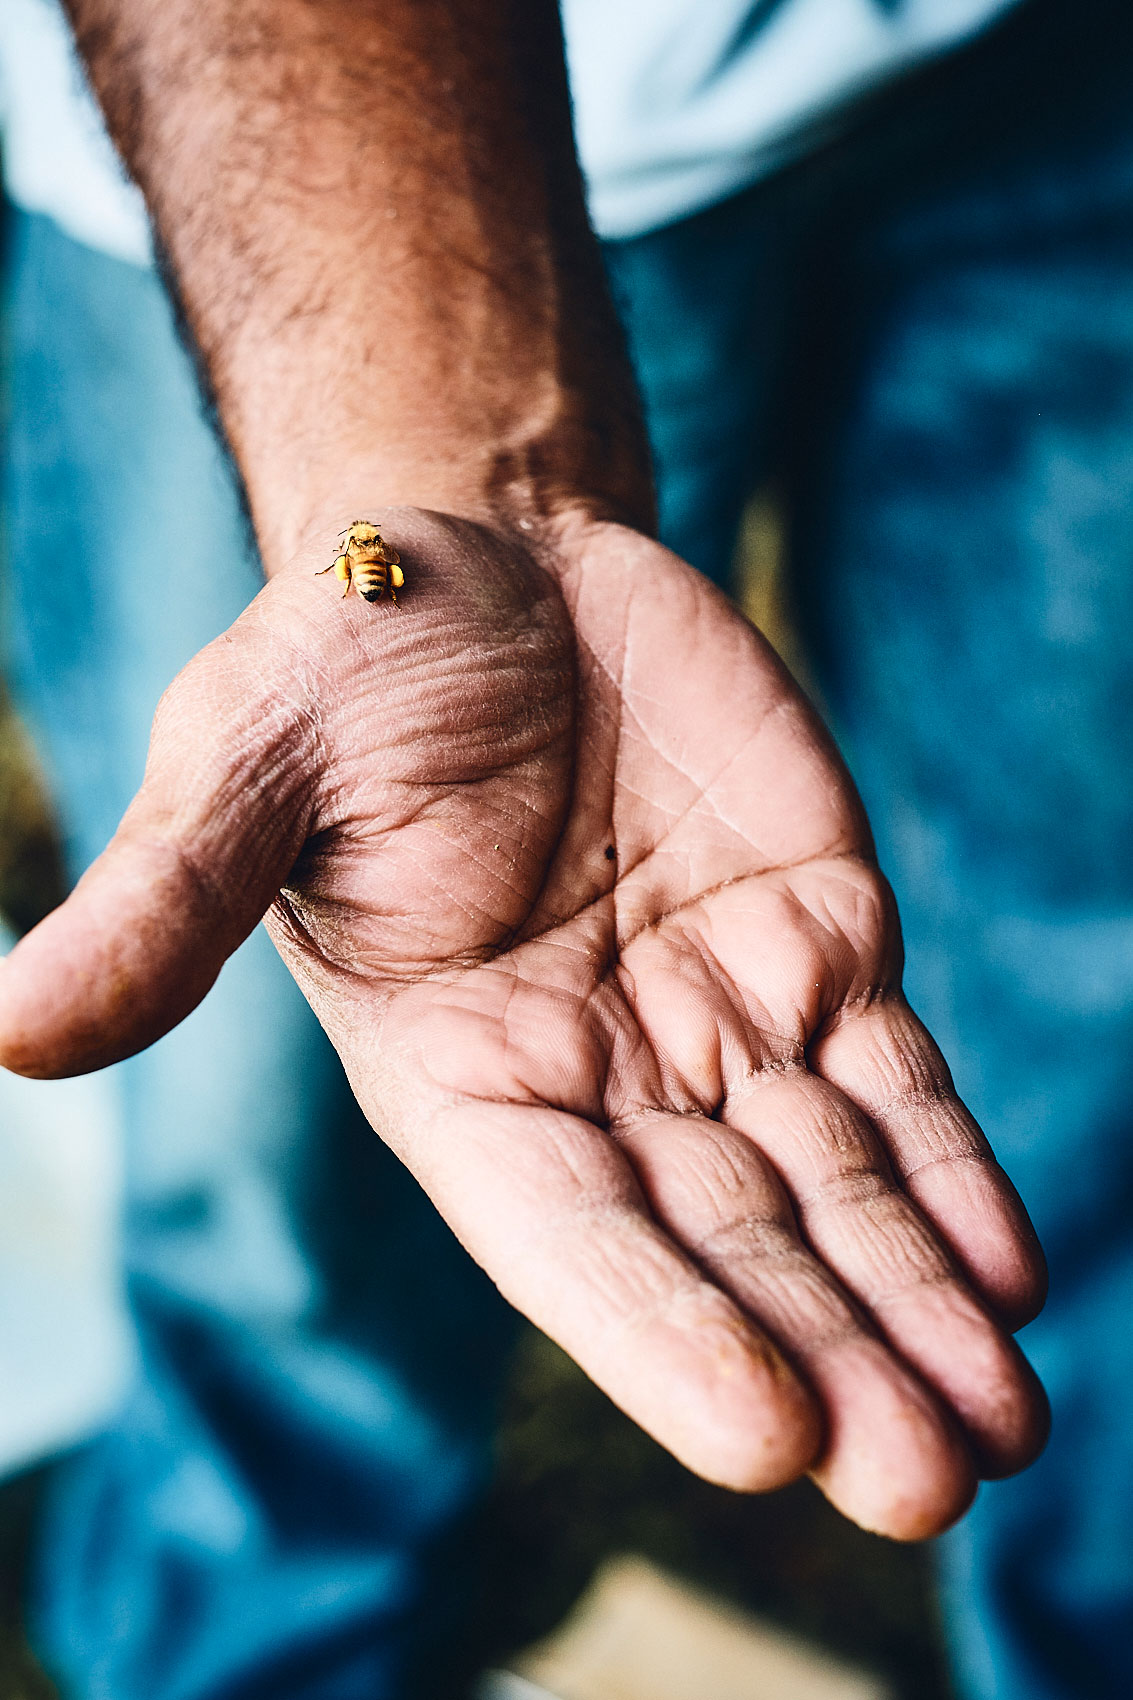 Our Beehive • New Zealand Honeybee on Palm of Hand • Lifestyle & Documentary Food Photography